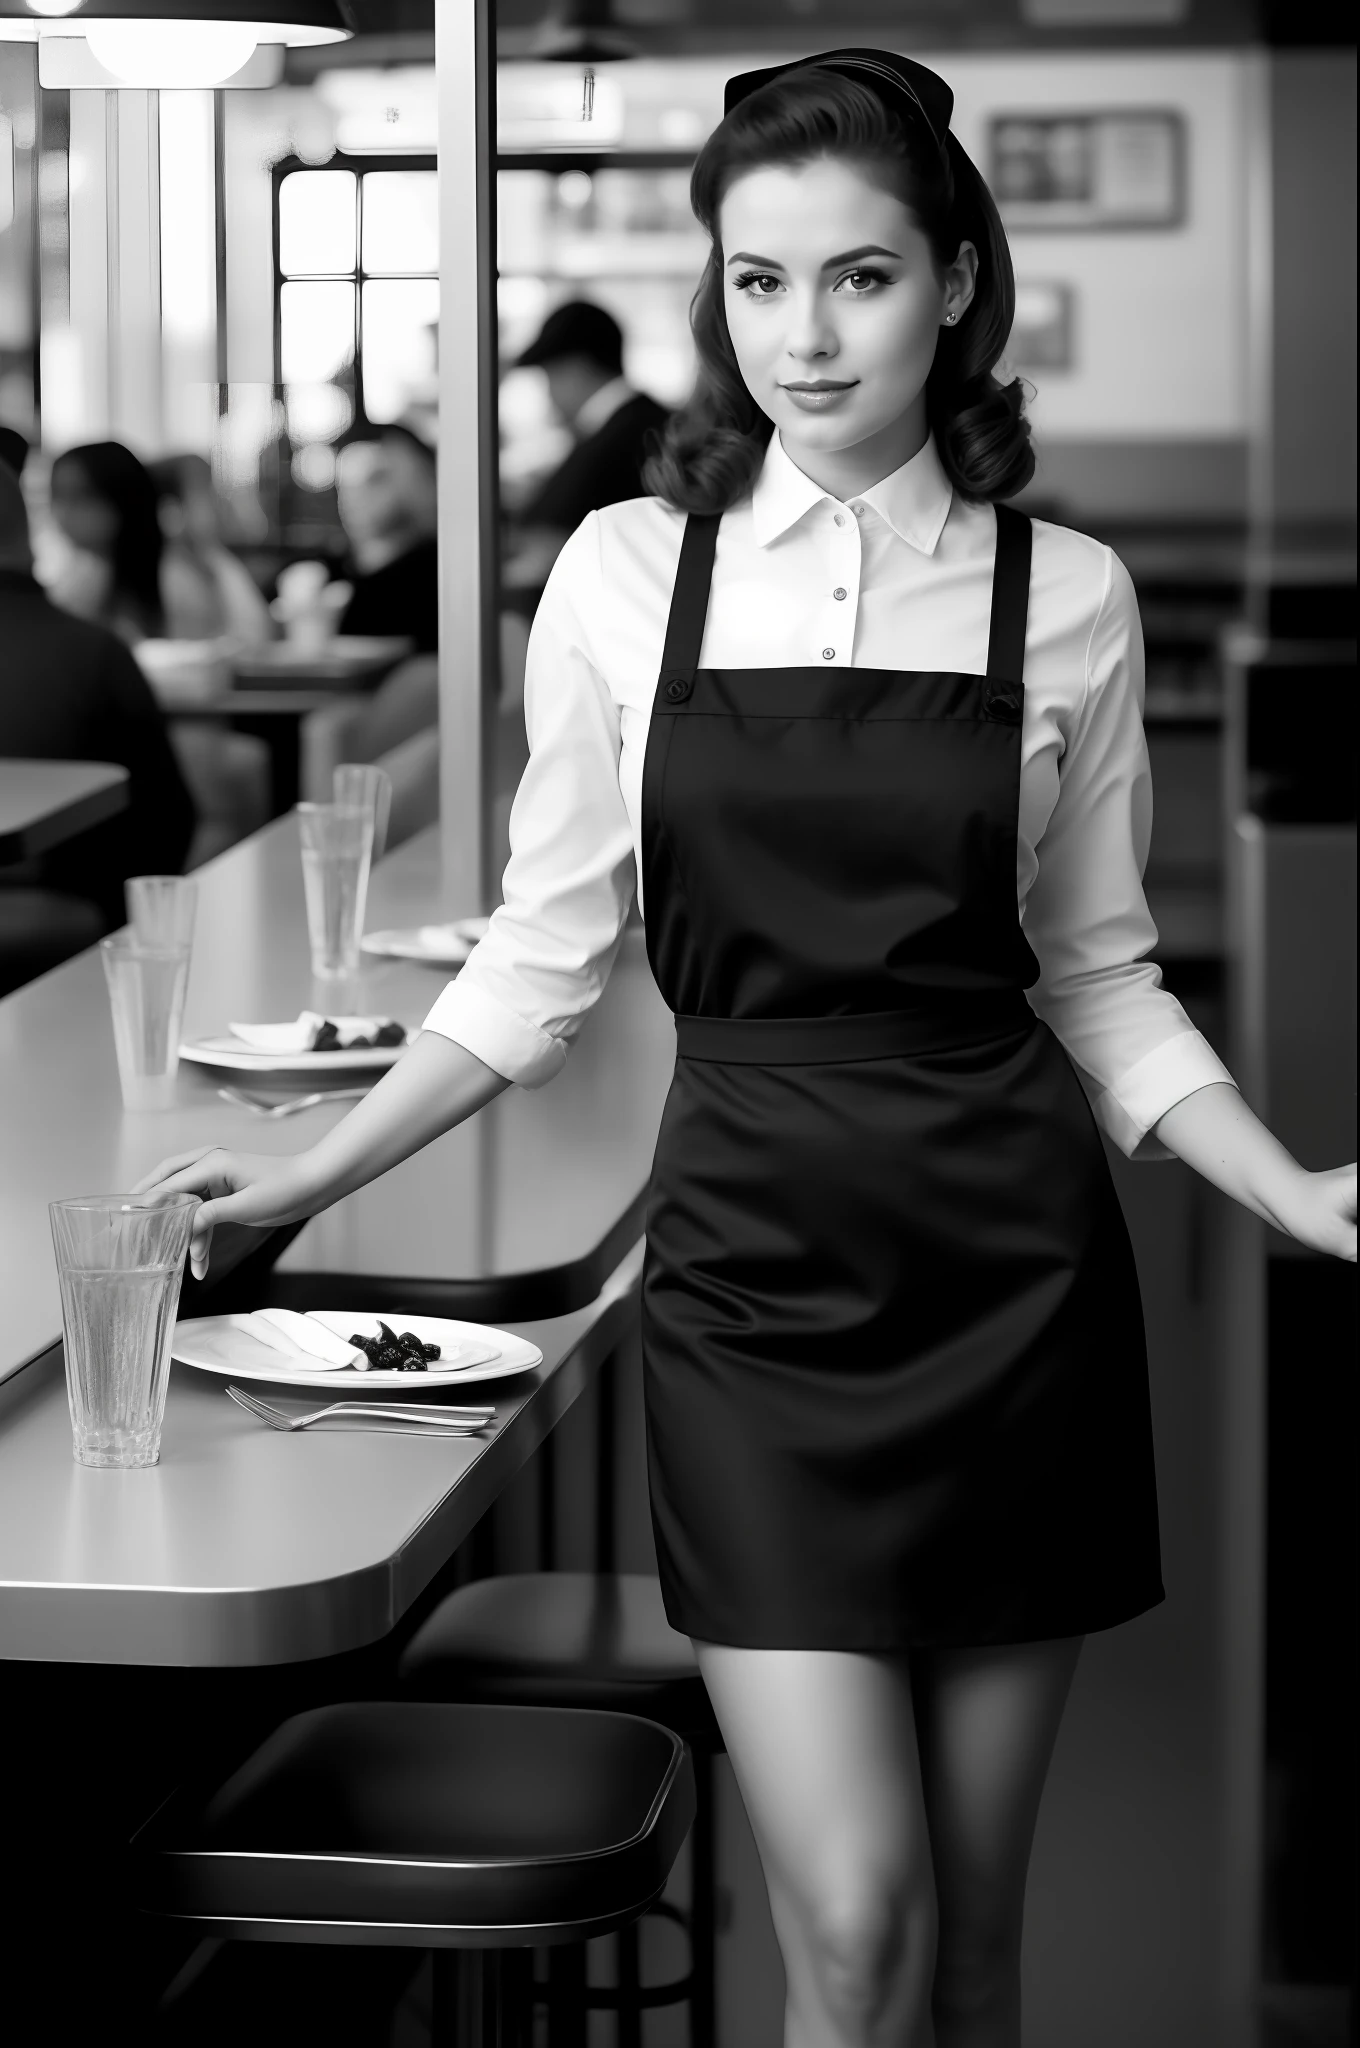 Detailed vintage diner with blond waitress serving customers, black and white theme, 1940s dress, detailed face, professional lighting, busy background, ((realistic)), camera blurr, sharp focus, single female, 1girl, solo female, short skirt, monochrome